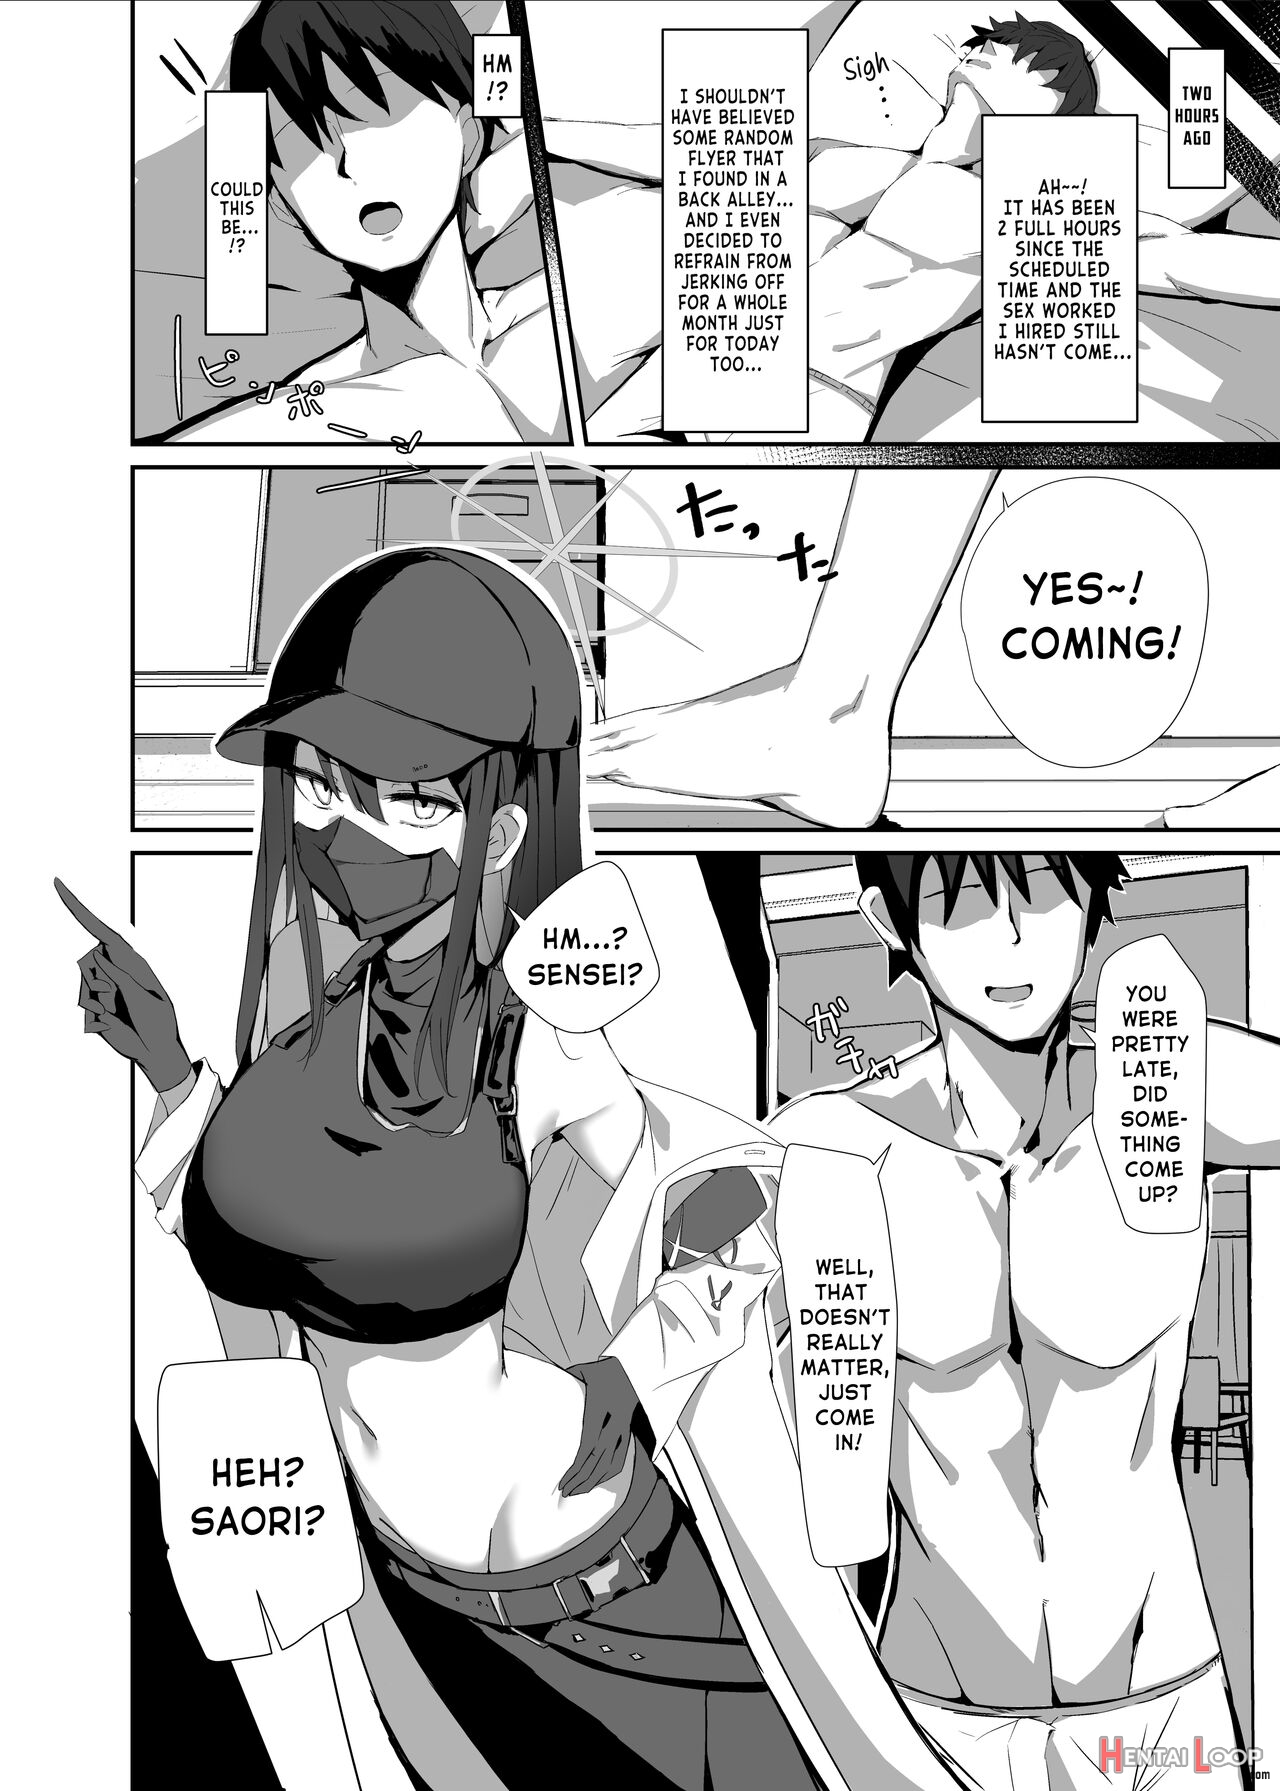 The Book Where I Hired A Sex Worker But Then Saori Showed Up And Just Like That We Had Sex page 6